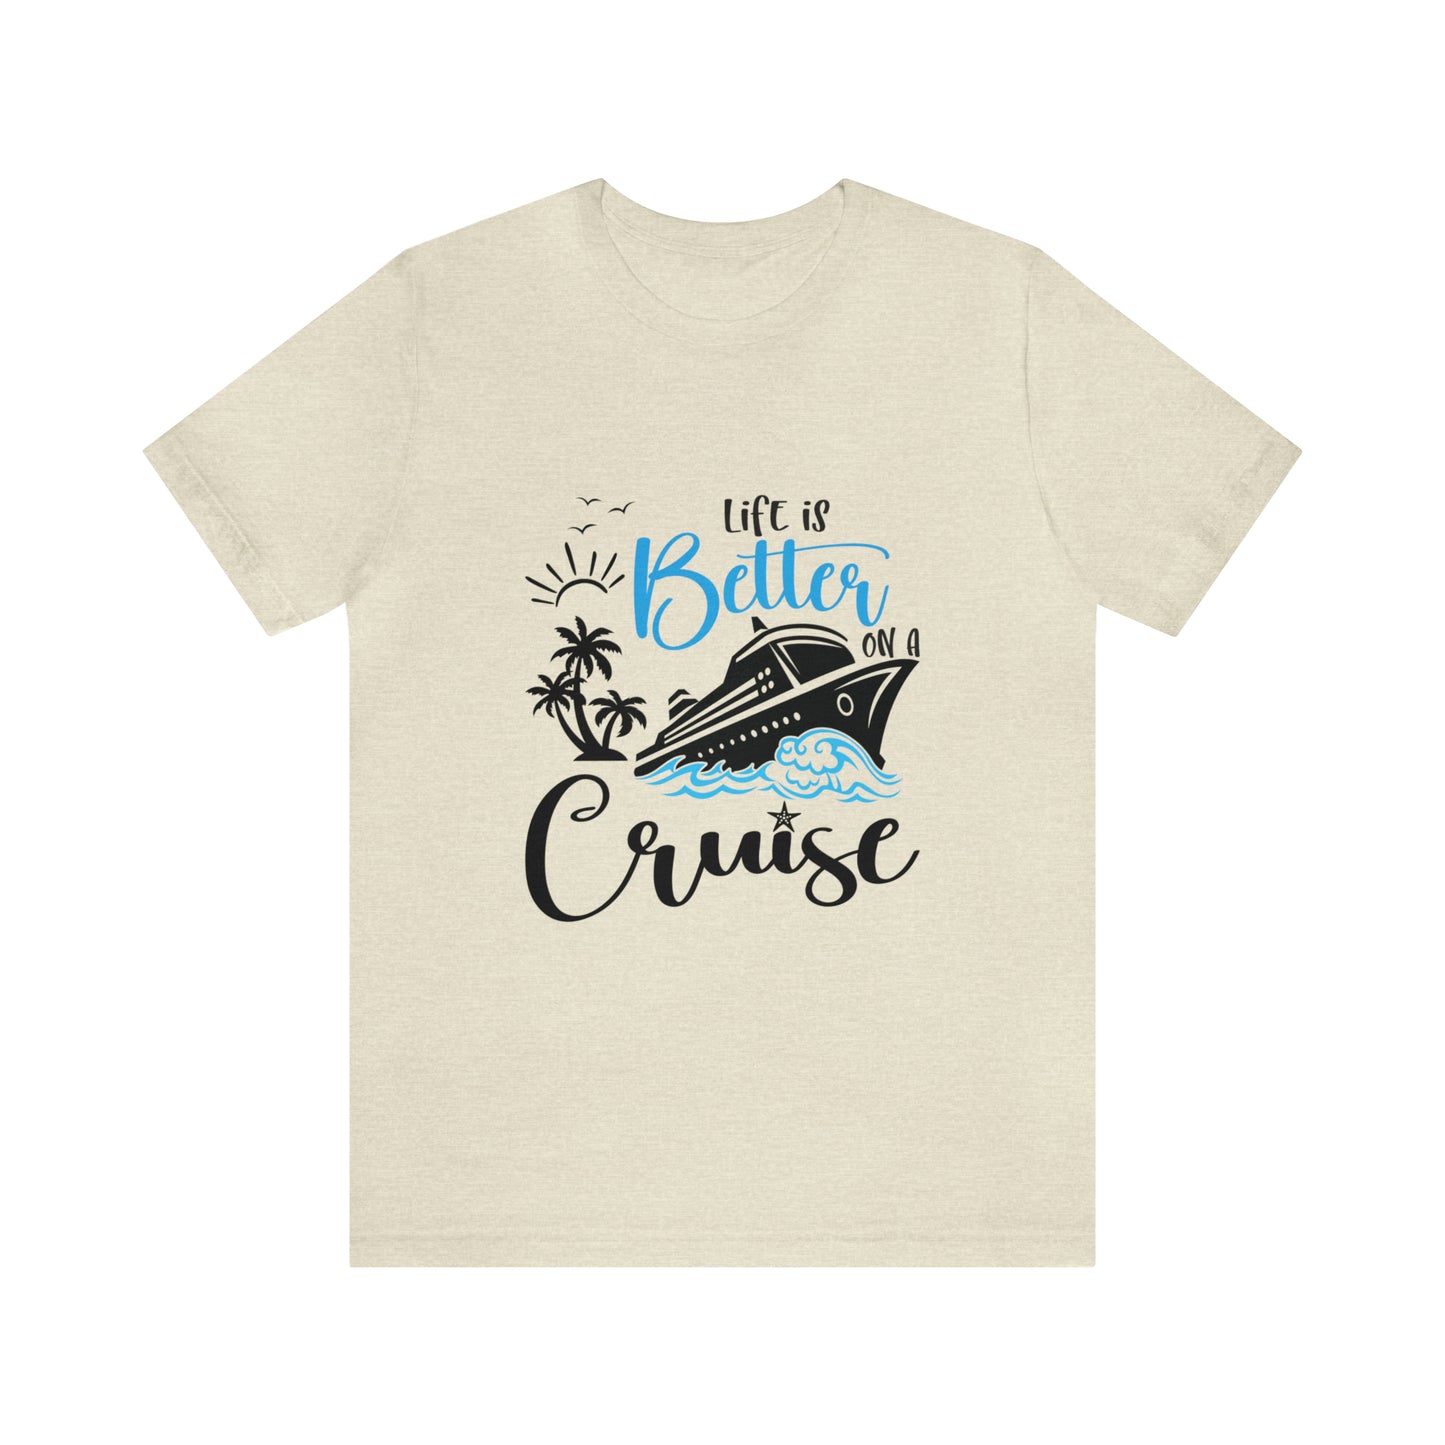 Life is Better on a Cruise - Jersey Short Sleeve T-Shirt